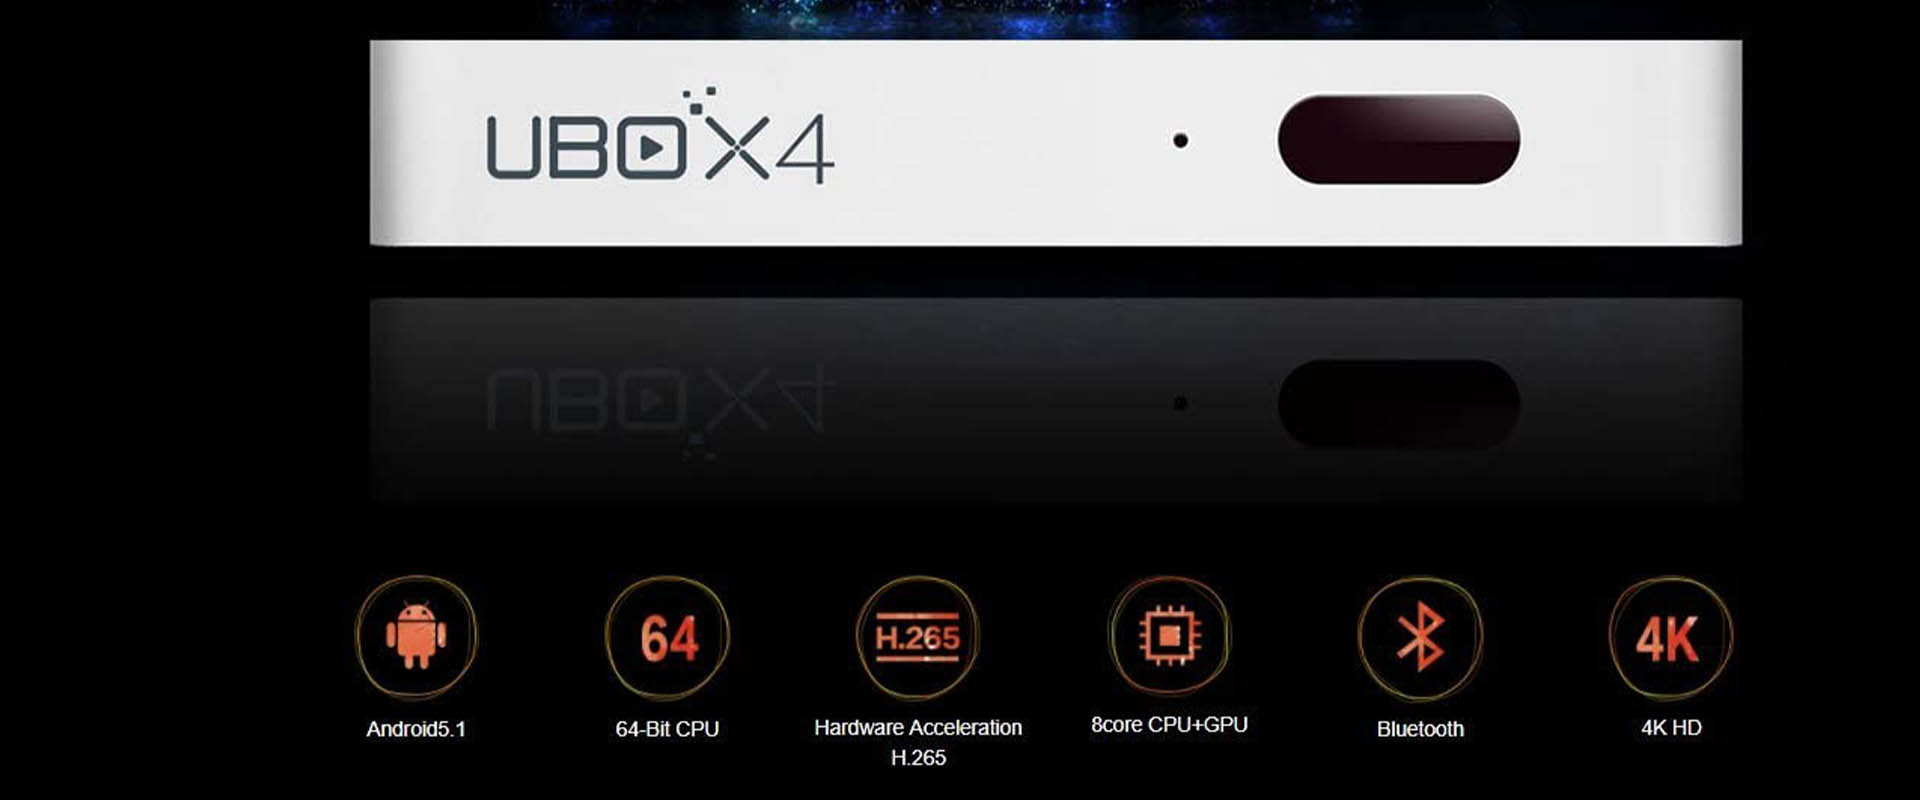 Unblock Tech Ubox 4 - No Need to Charge Again for Watching TV